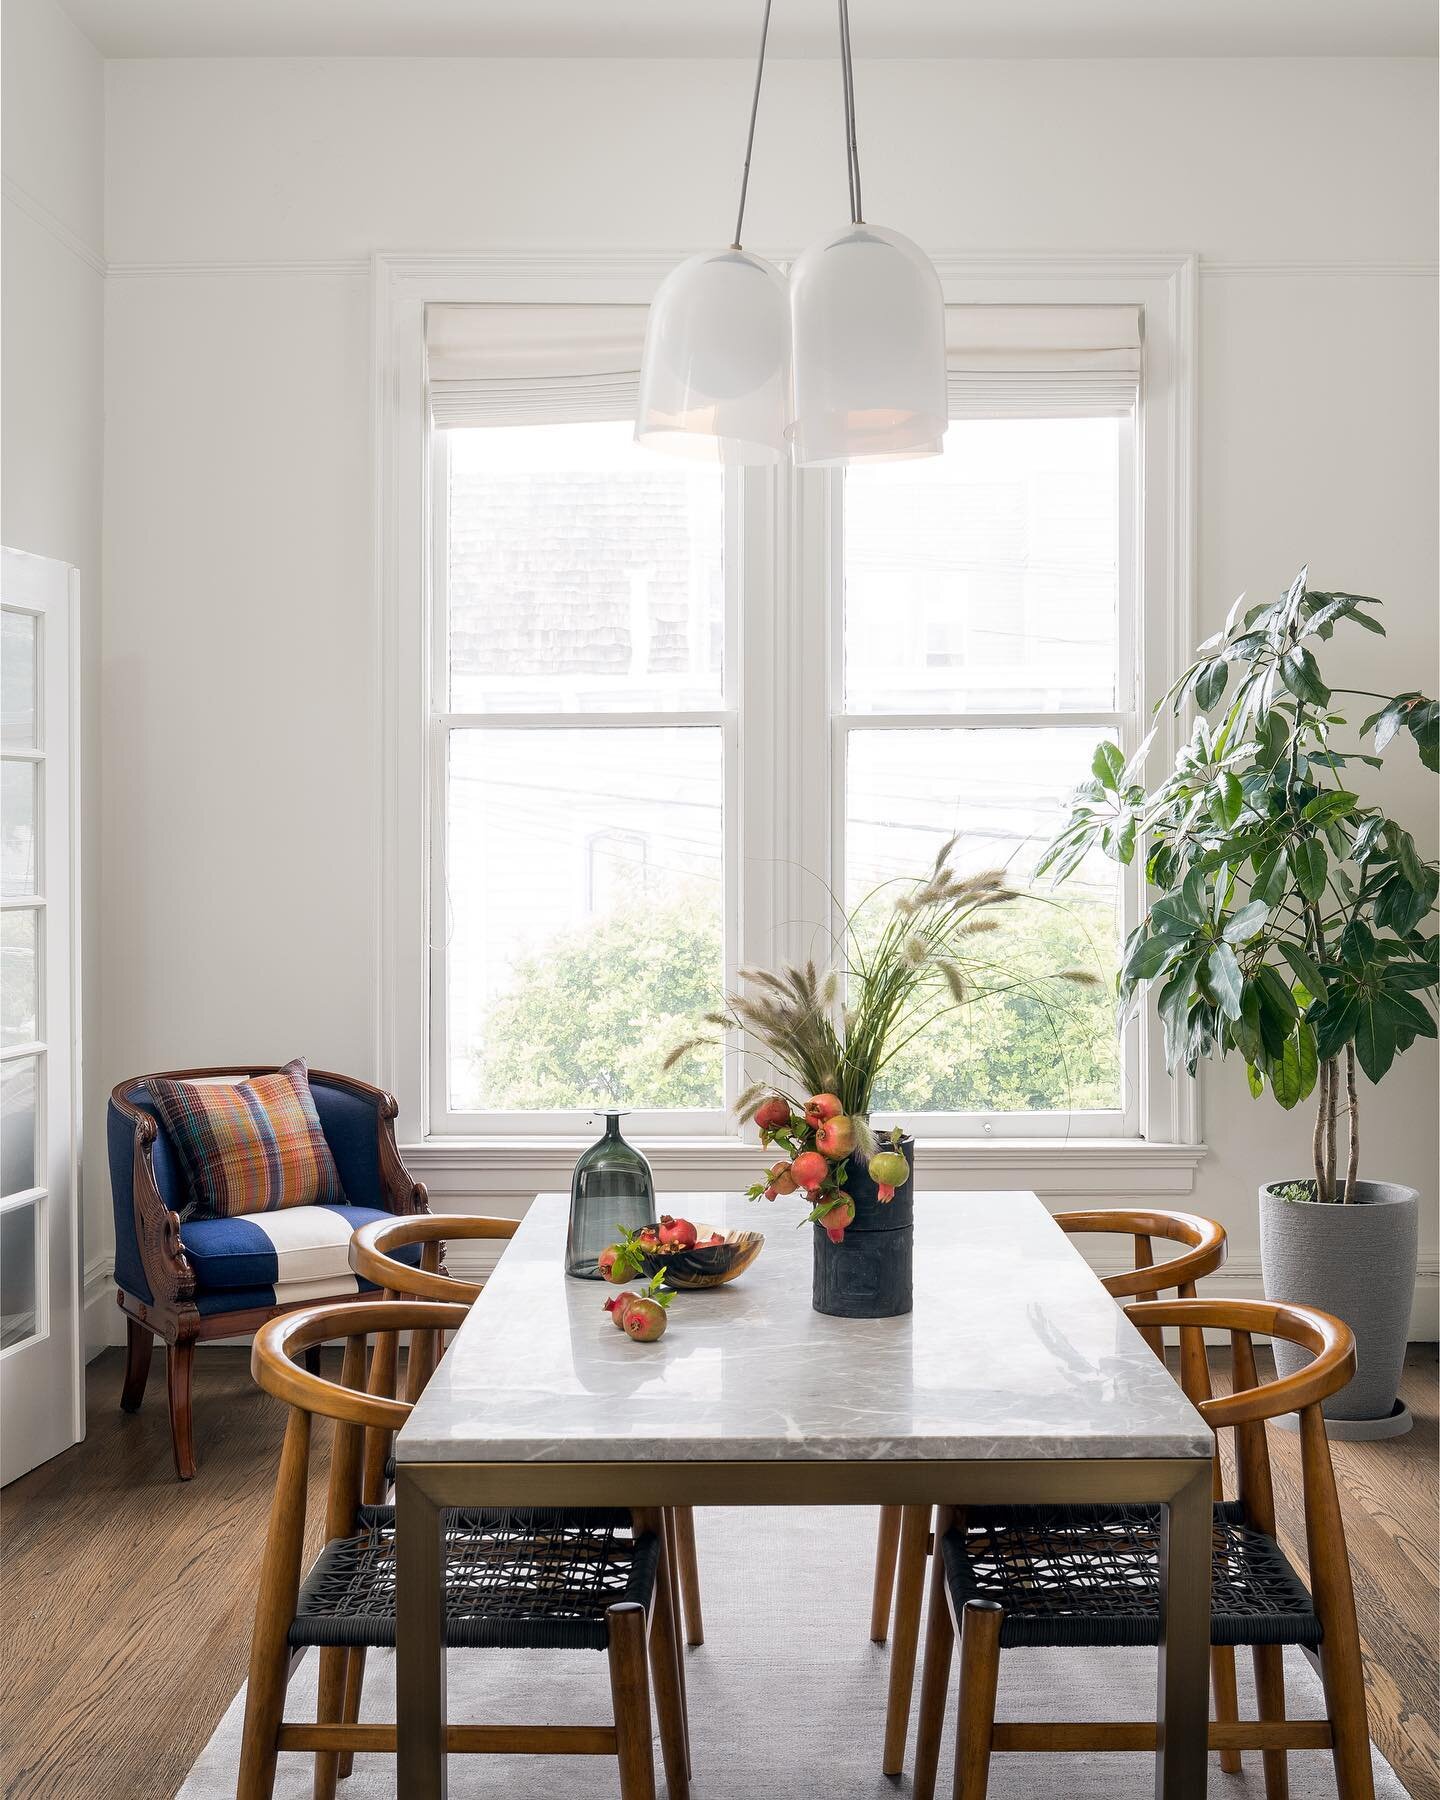 Another shot of our San Francisco dining room!⁣⁣
⁣⁣
I had a wood dining table here but it was getting destroyed by the sun. These are original windows from the 1850s &amp; they have zero UV protection, so I replaced it with a stone dining table.⁣
⁣
F